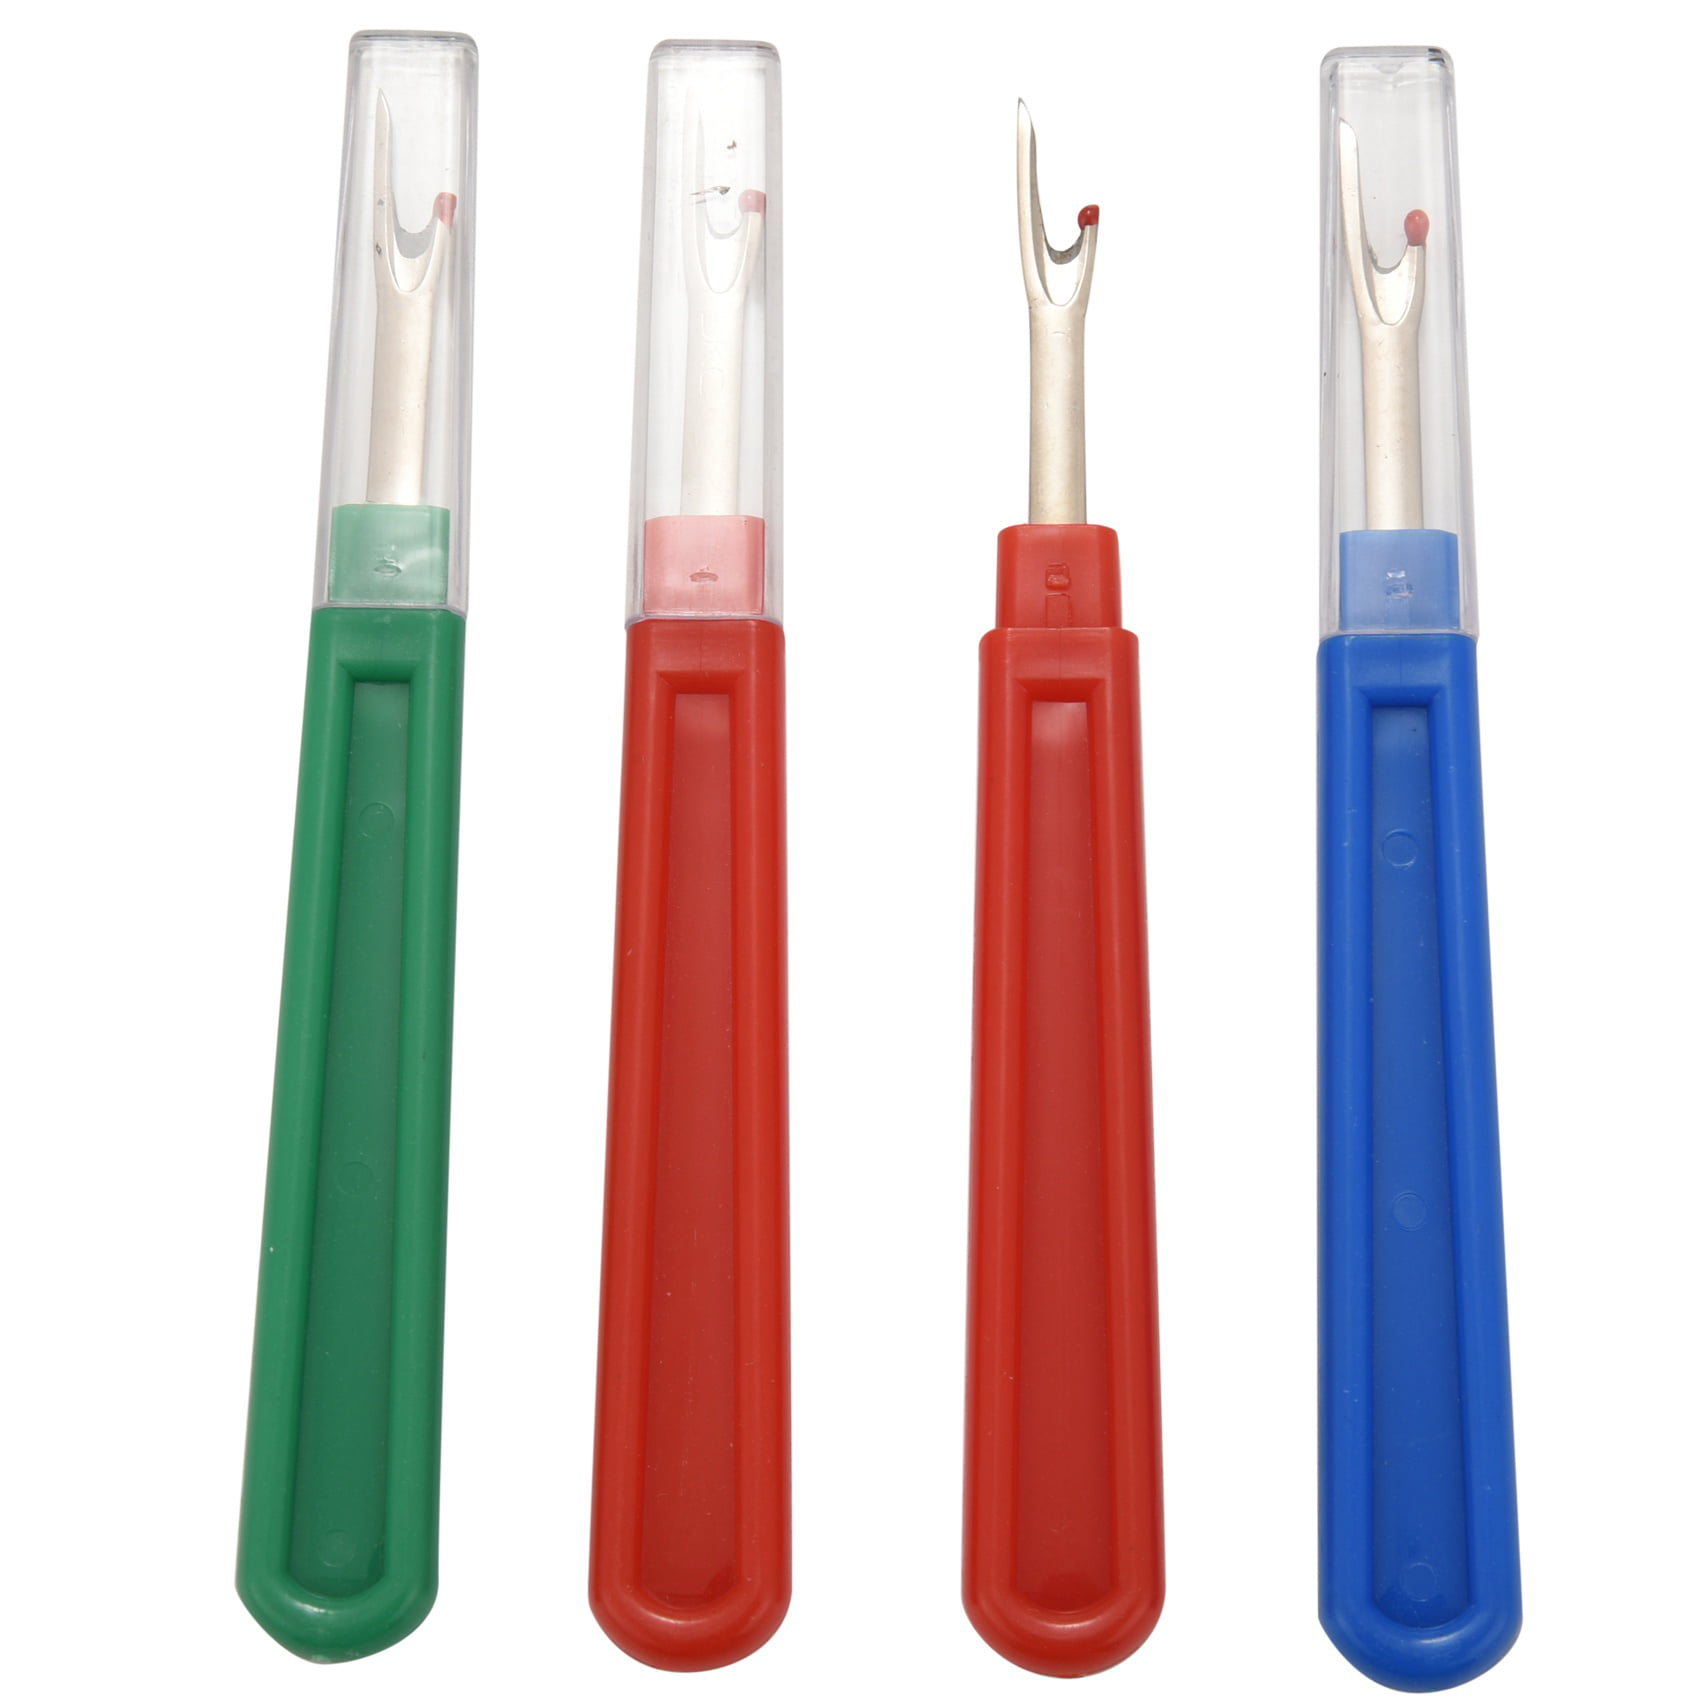 Andifany 4pcs Best large seam ripper durable Perfect sewing supplies for opening seams and hems 